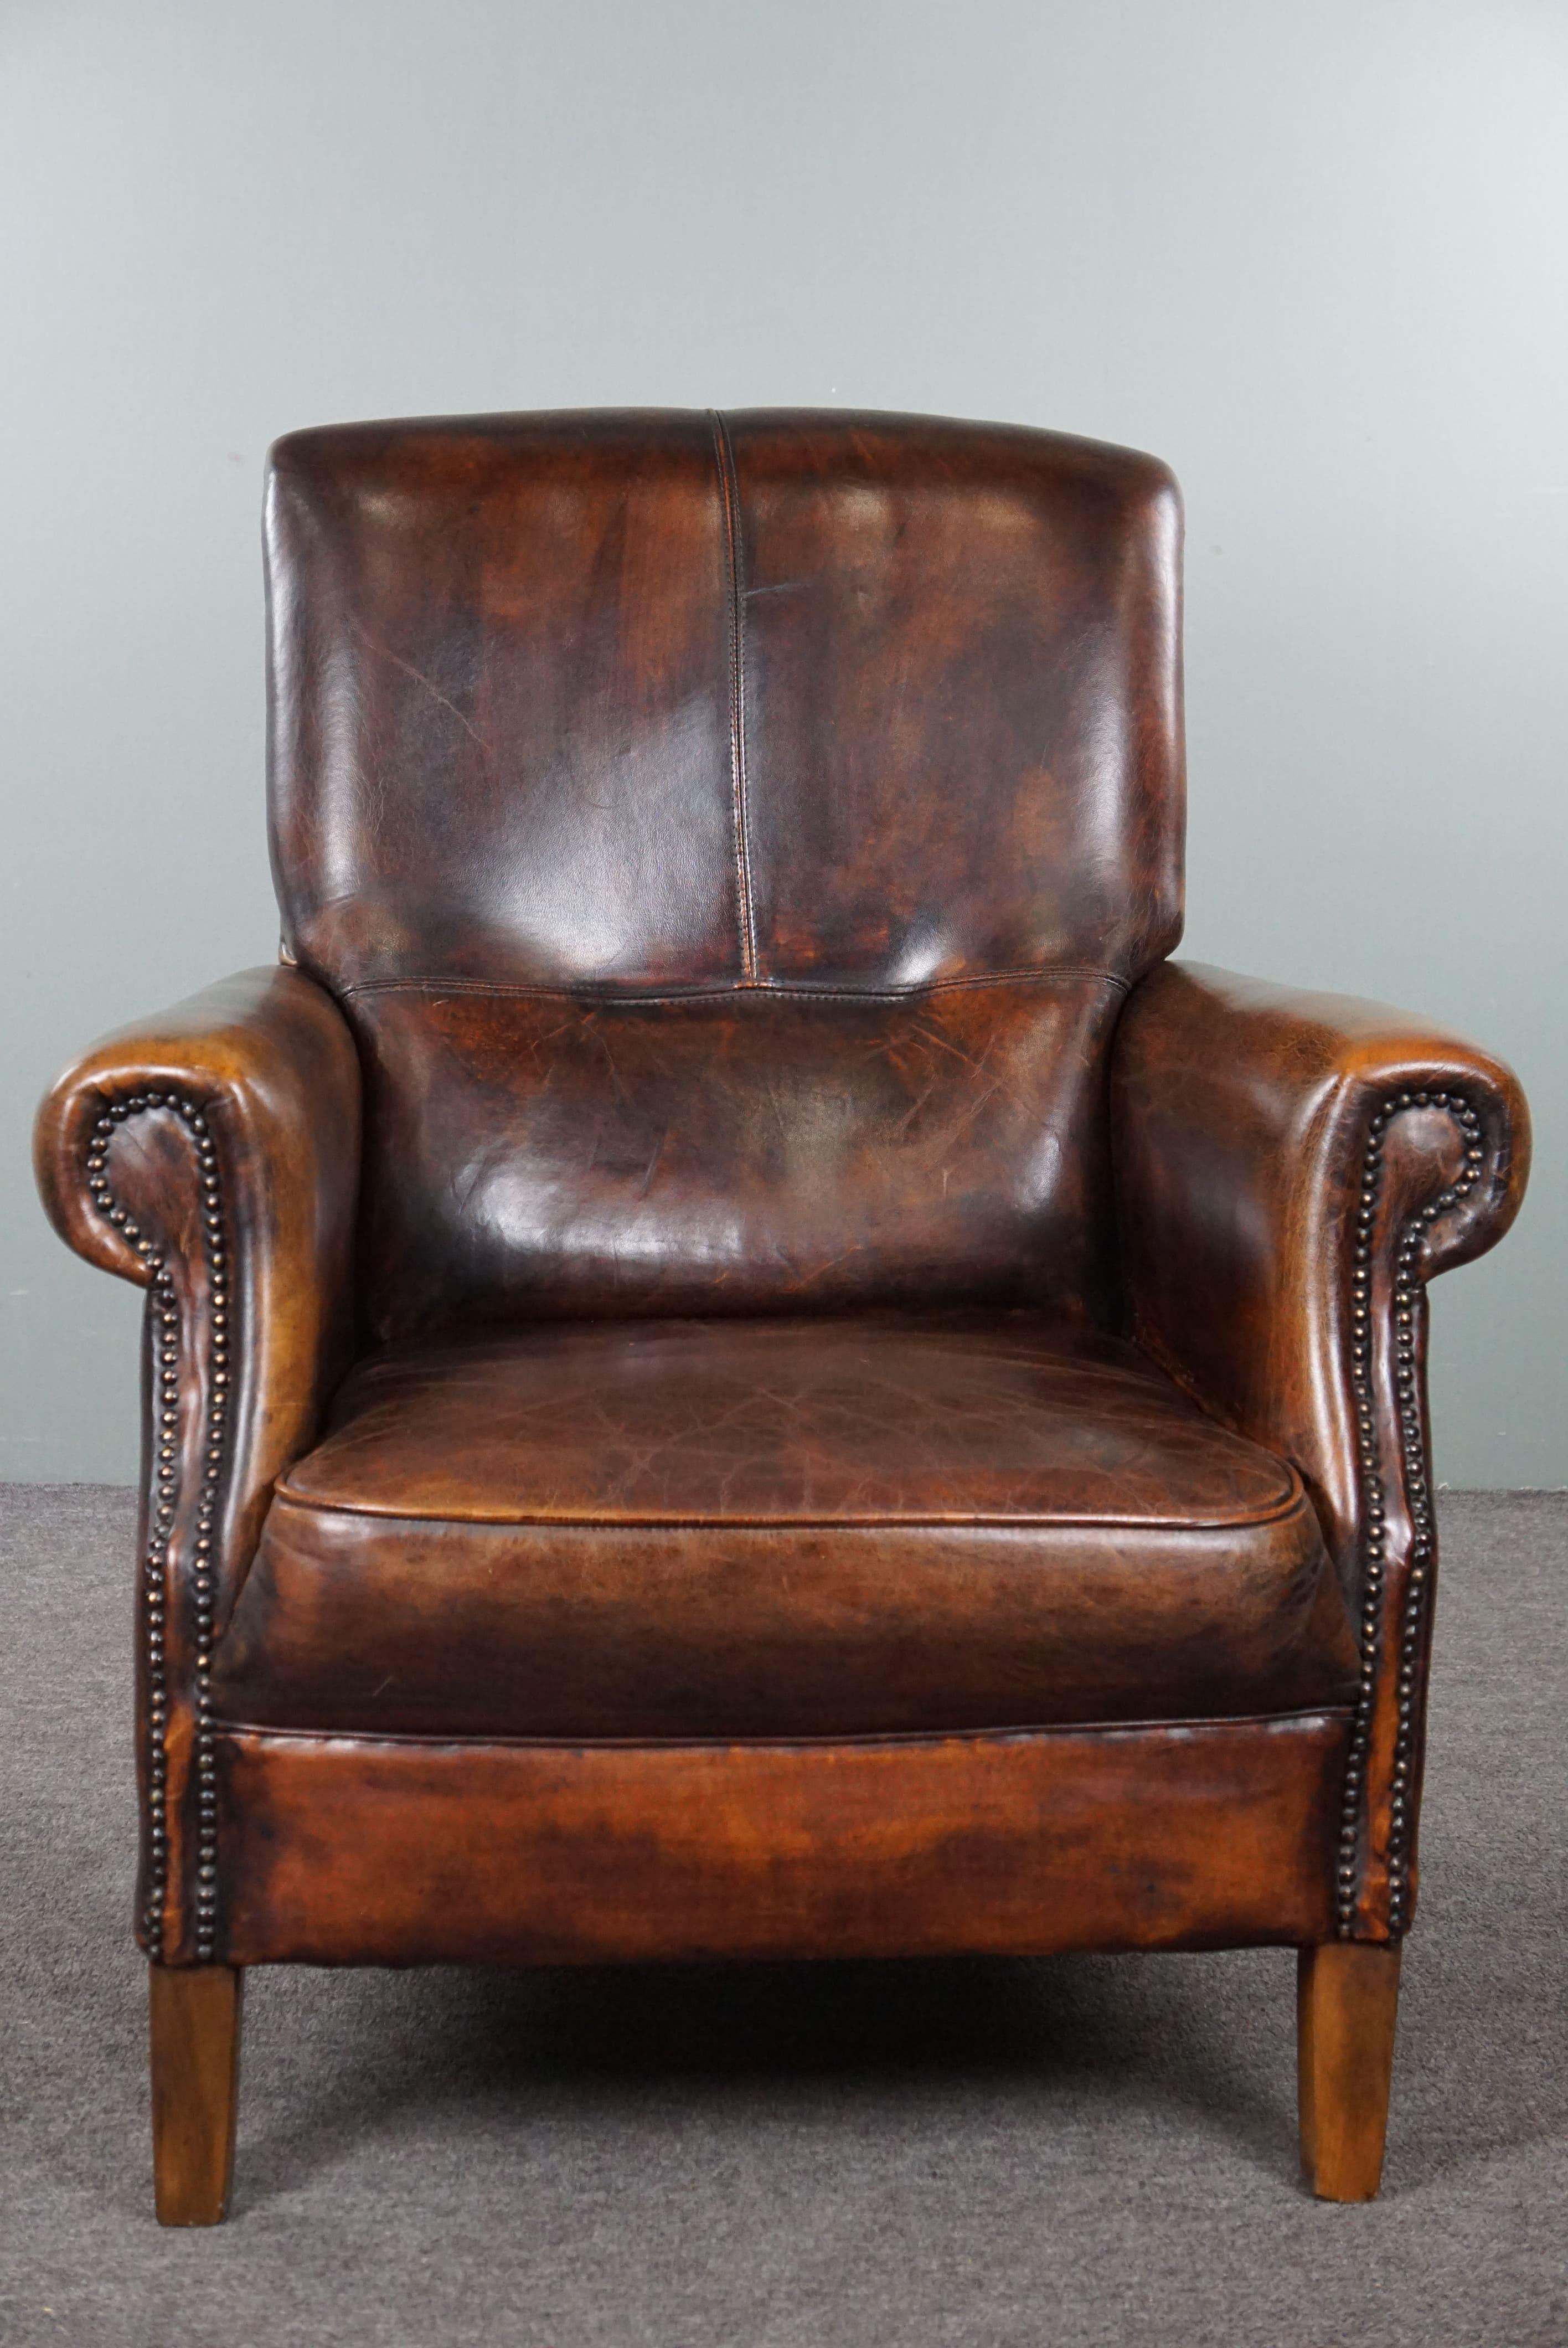 Offered is this beautiful and comfortable sheep leather armchair with truly stunning colors. This sheep leather armchair is in good condition and provides a delightful seating experience. As such, it's not just a comfortable seat but also a